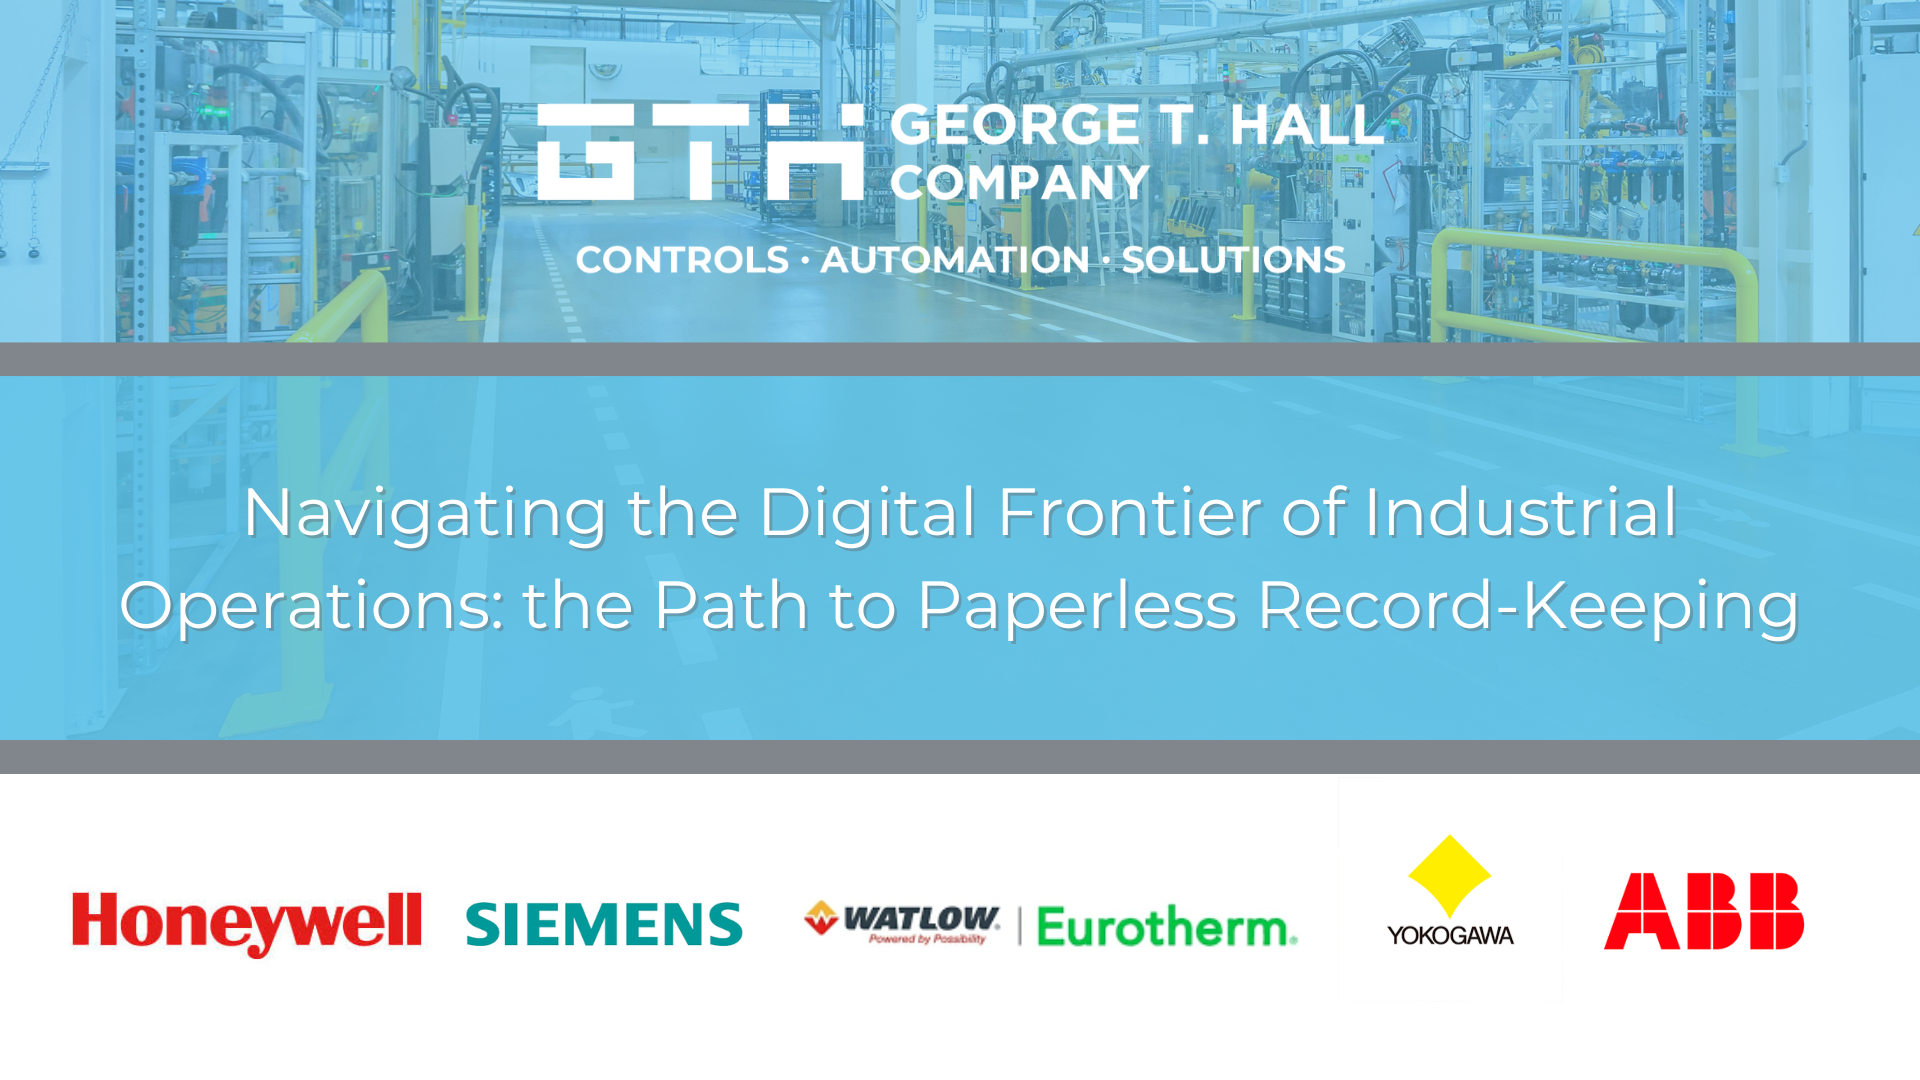 Navigating the Digital Frontier of Industrial Operations: the Path to Paperless Record-Keeping